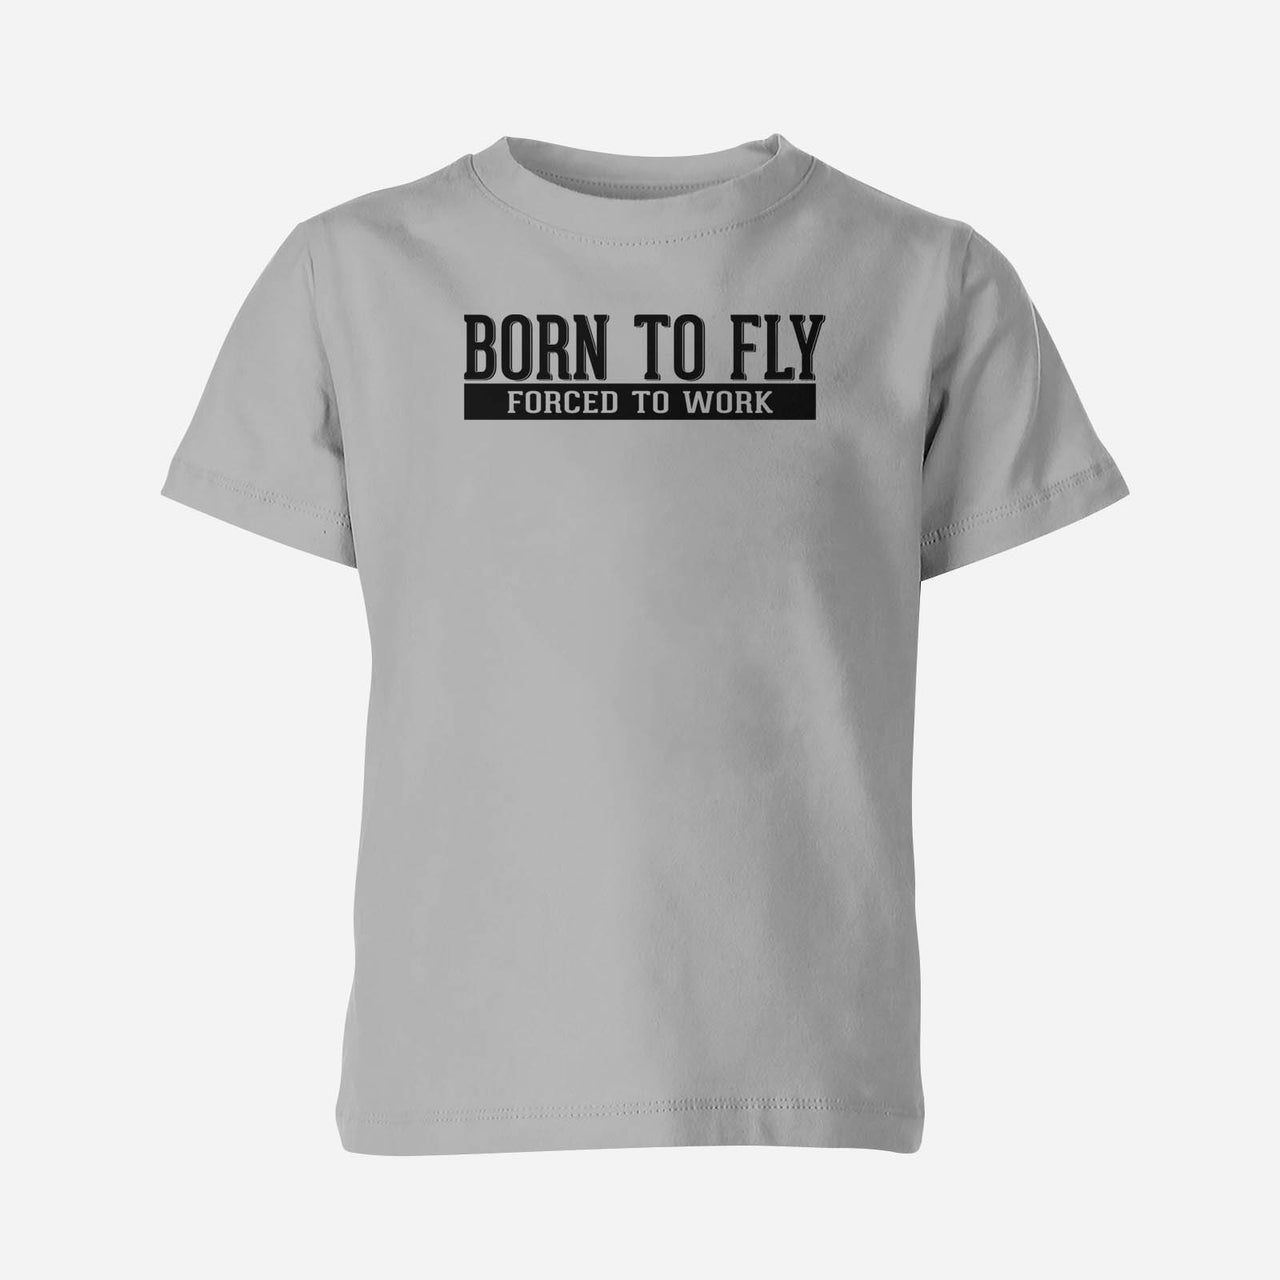 Born To Fly Forced To Work Designed Children T-Shirts